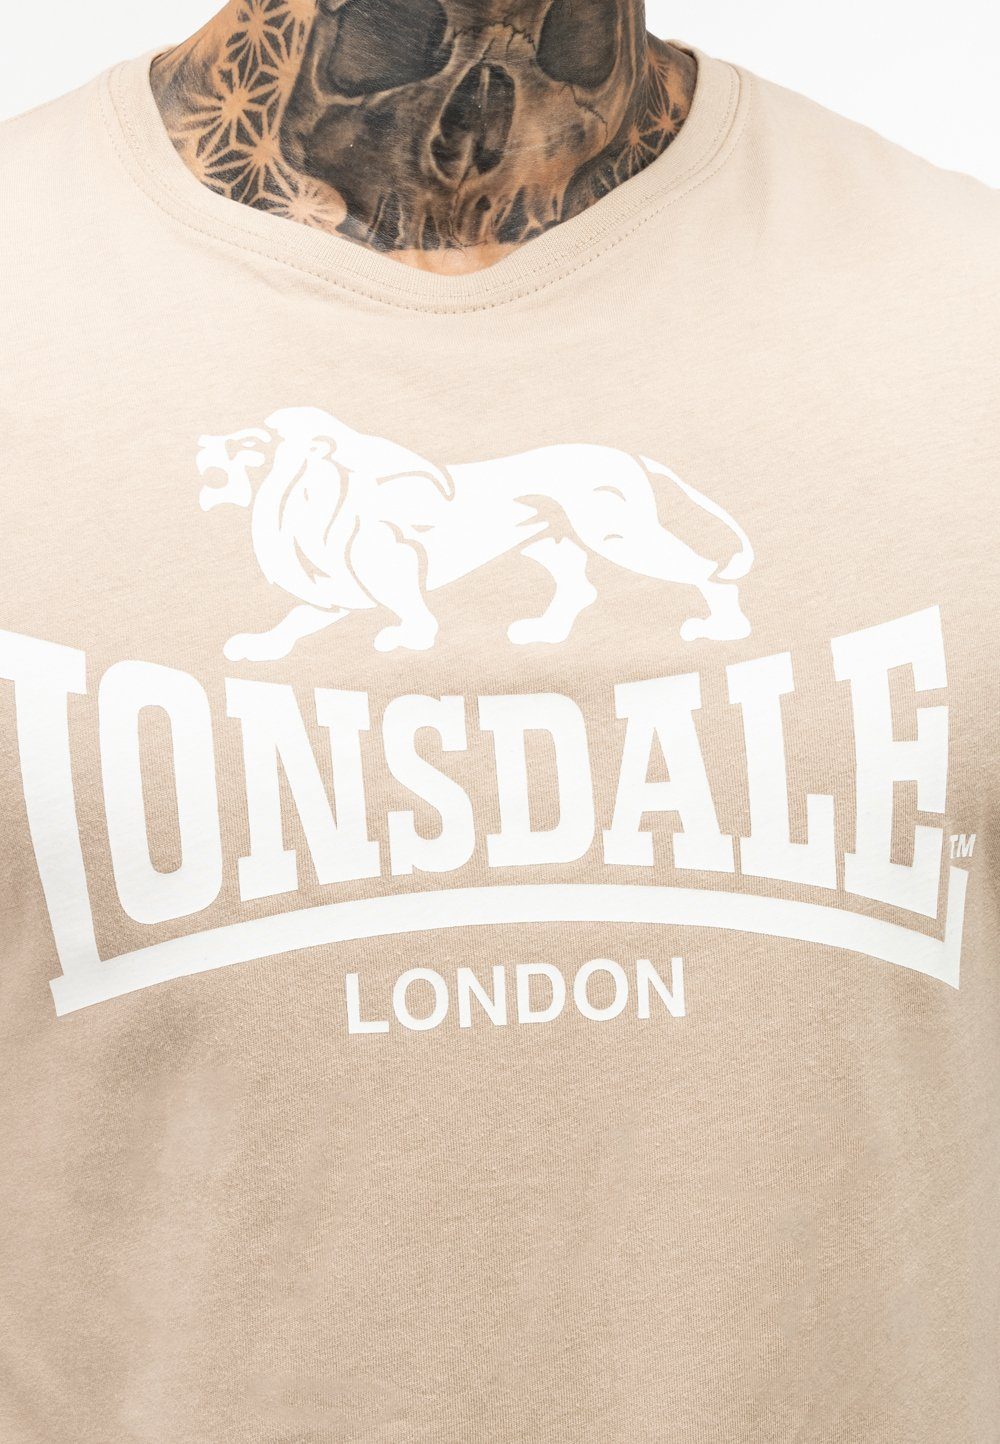 ERNEY Sand/White ST. Lonsdale T-Shirt